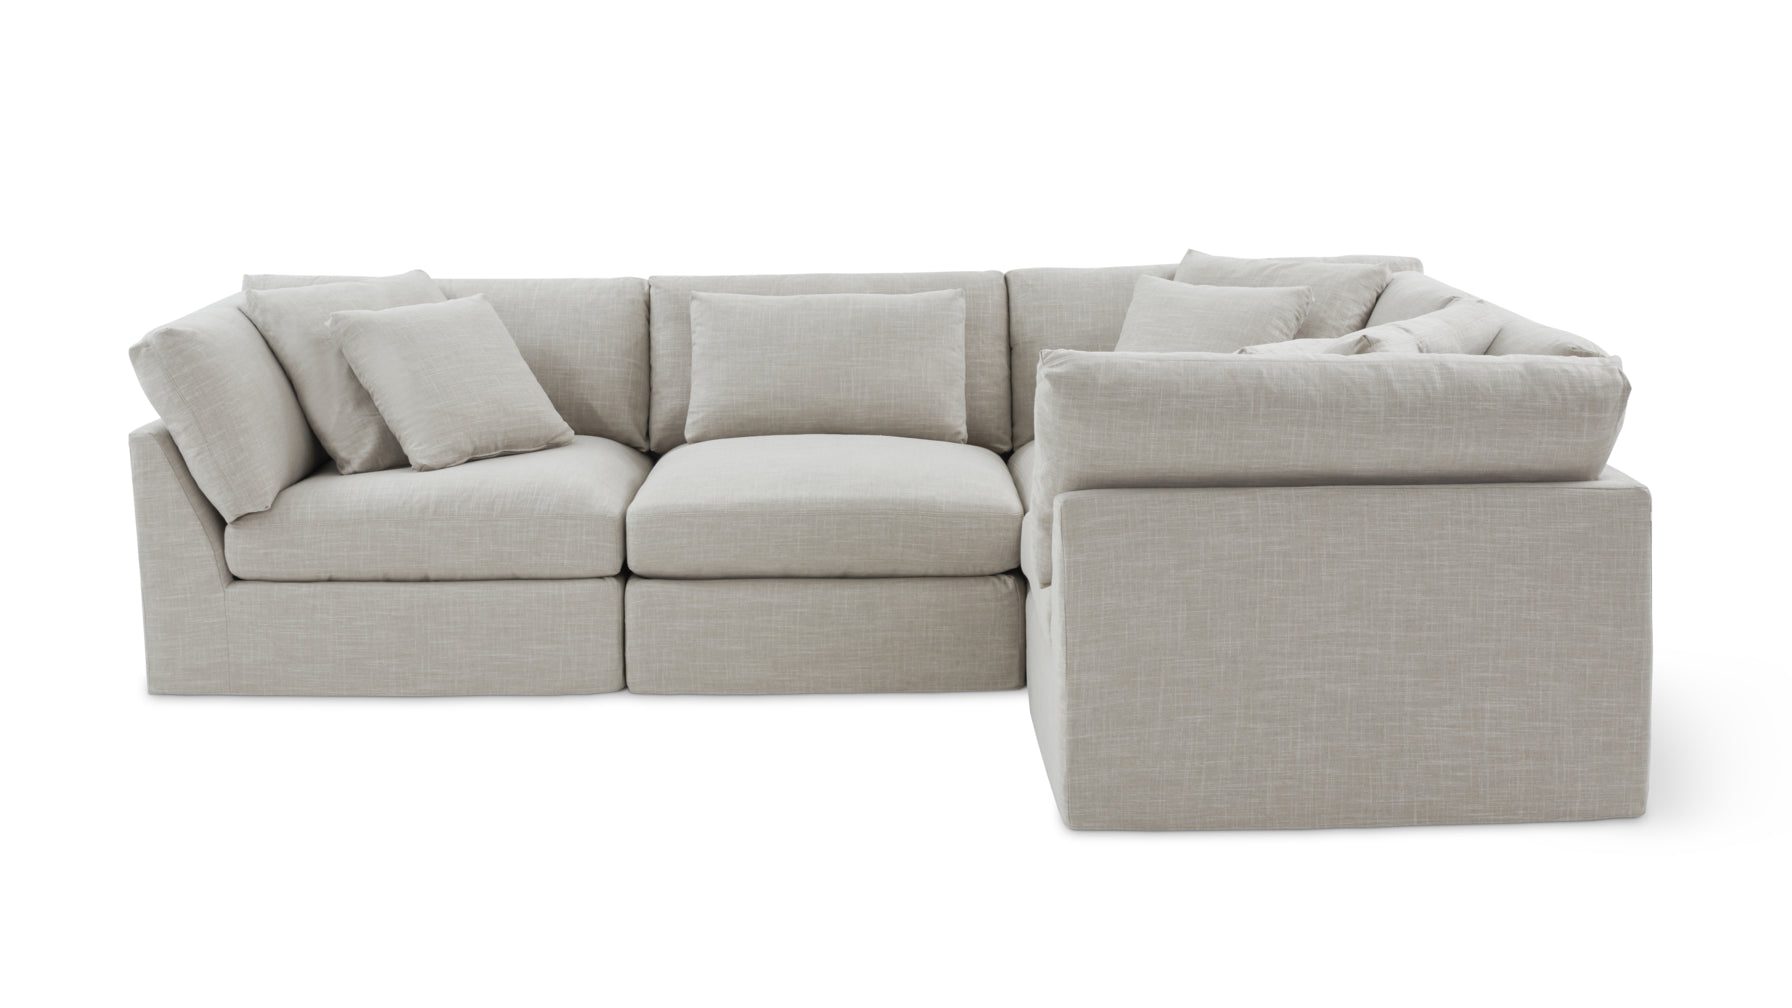 Get Together™ 4-Piece Modular Sectional Closed, Large, Light Pebble - Image 1